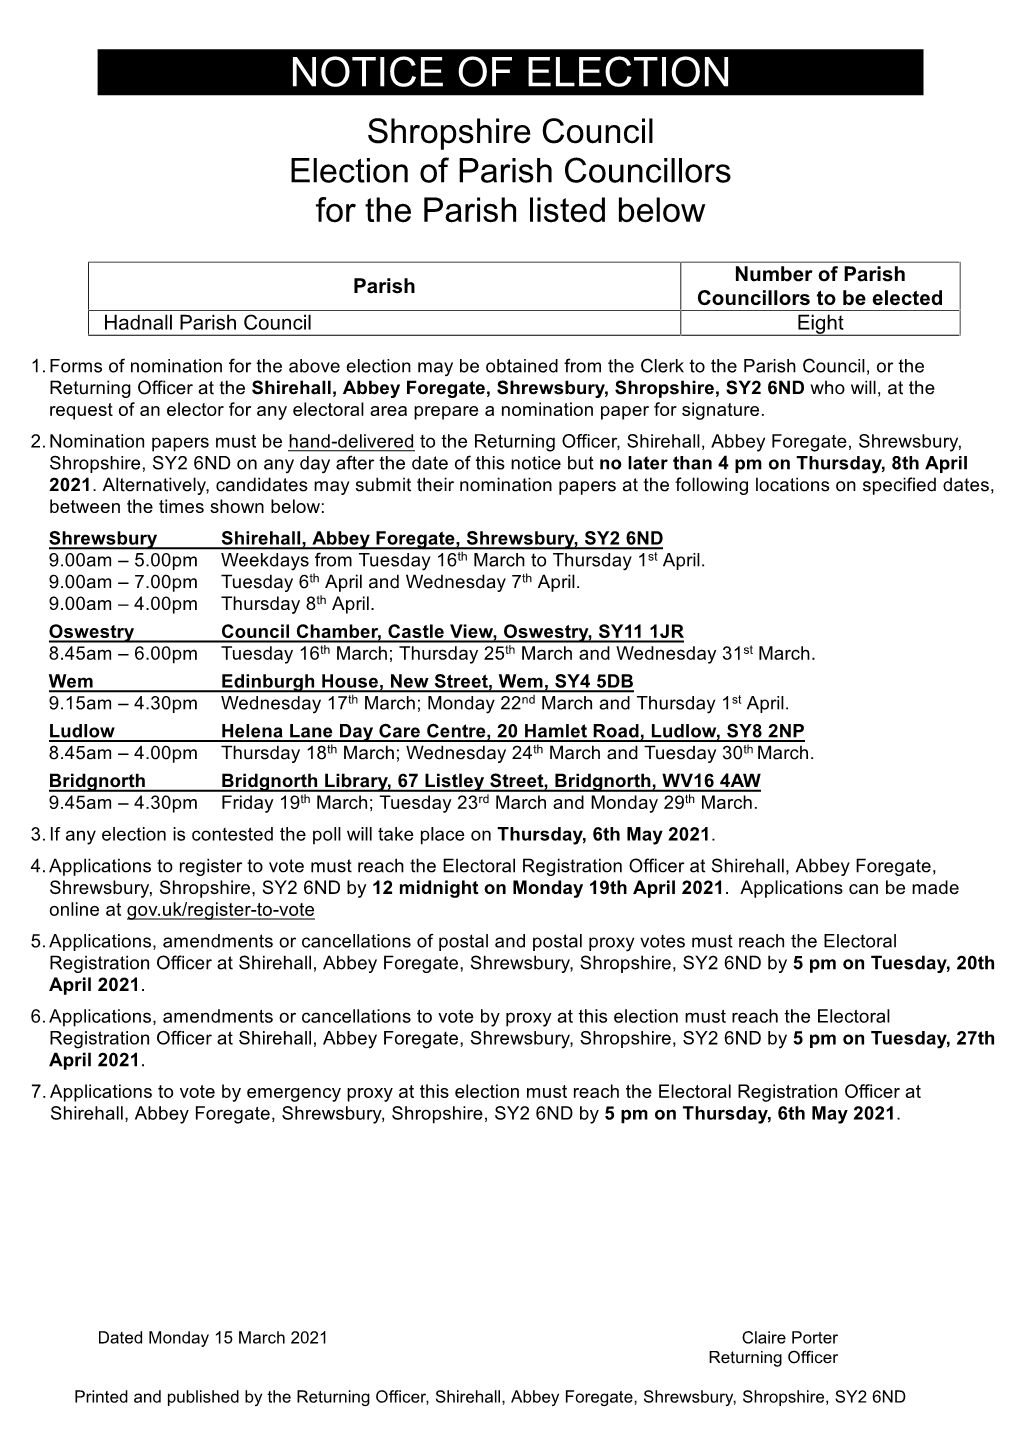 NOTICE of ELECTION Shropshire Council Election of Parish Councillors for the Parish Listed Below